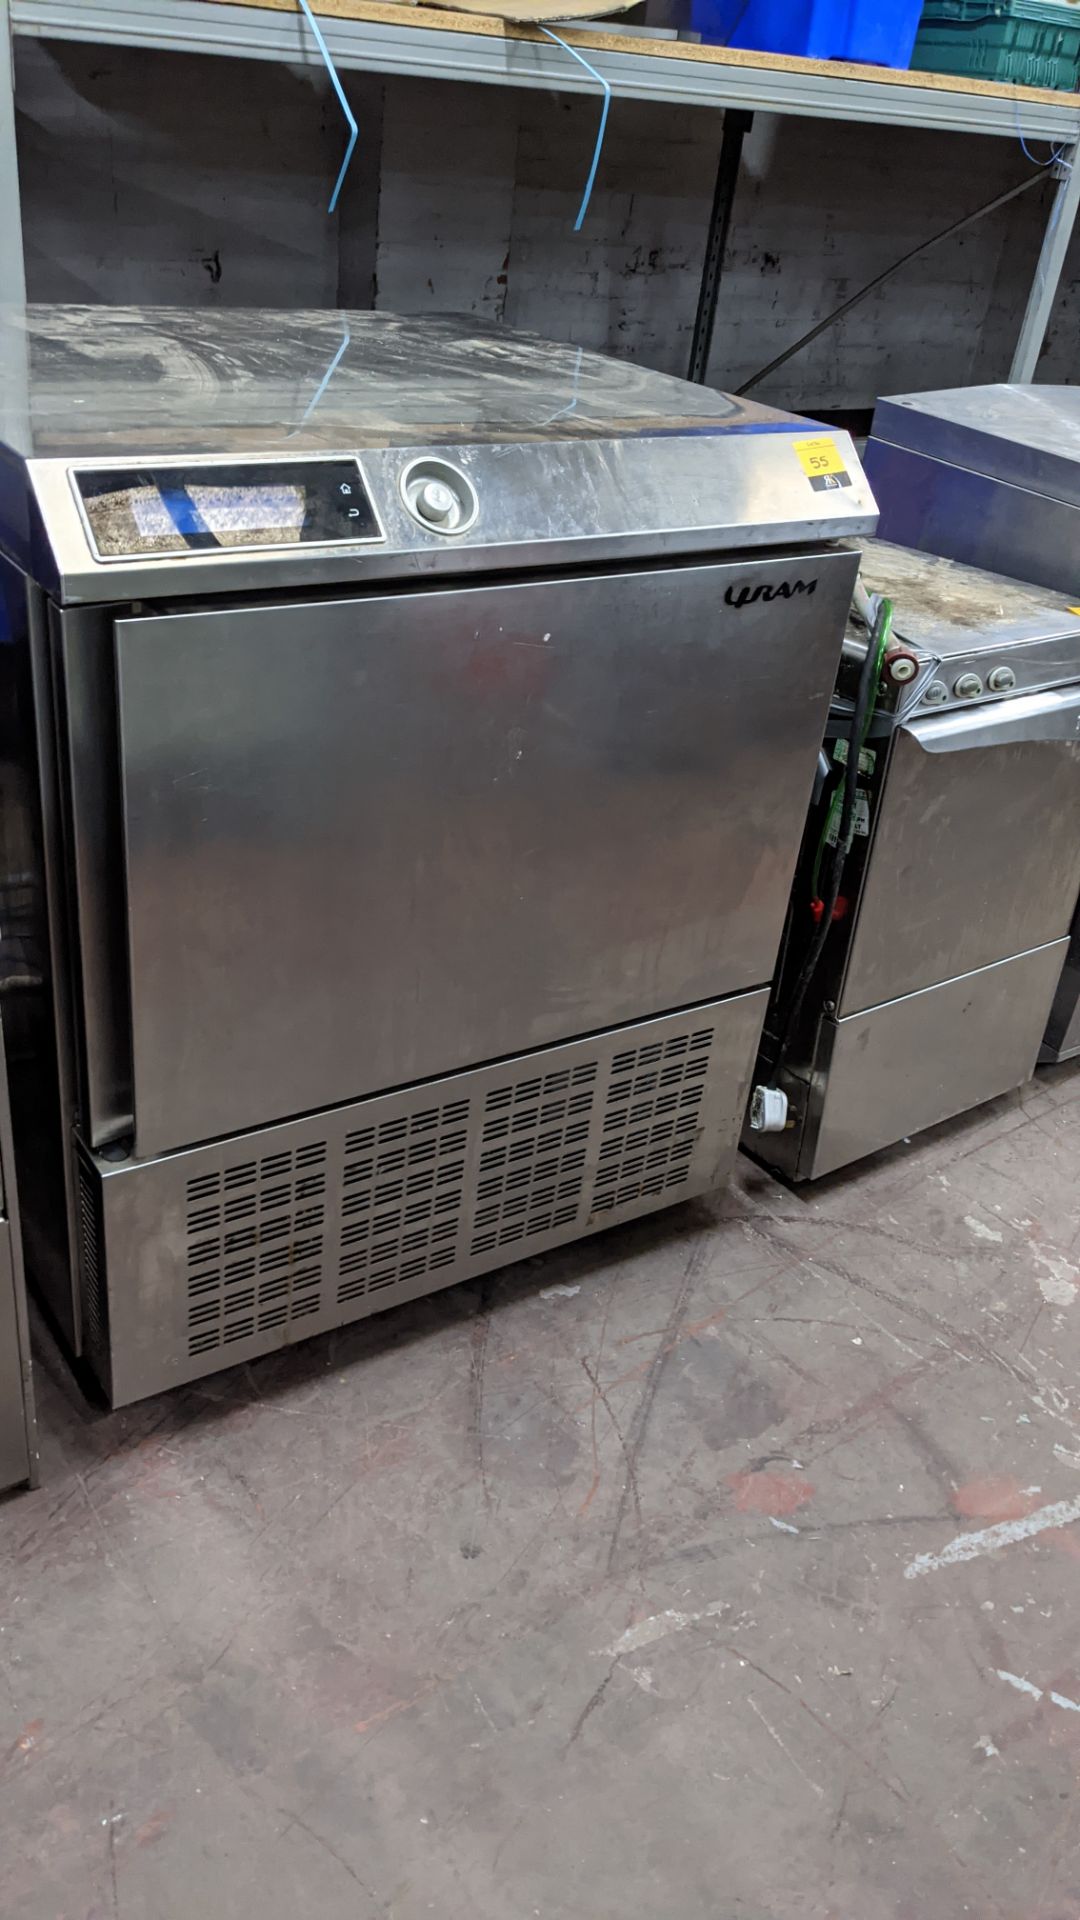 Gram KPS21CH-OPE5 stainless steel commercial blast chiller with LCD display - Image 2 of 5